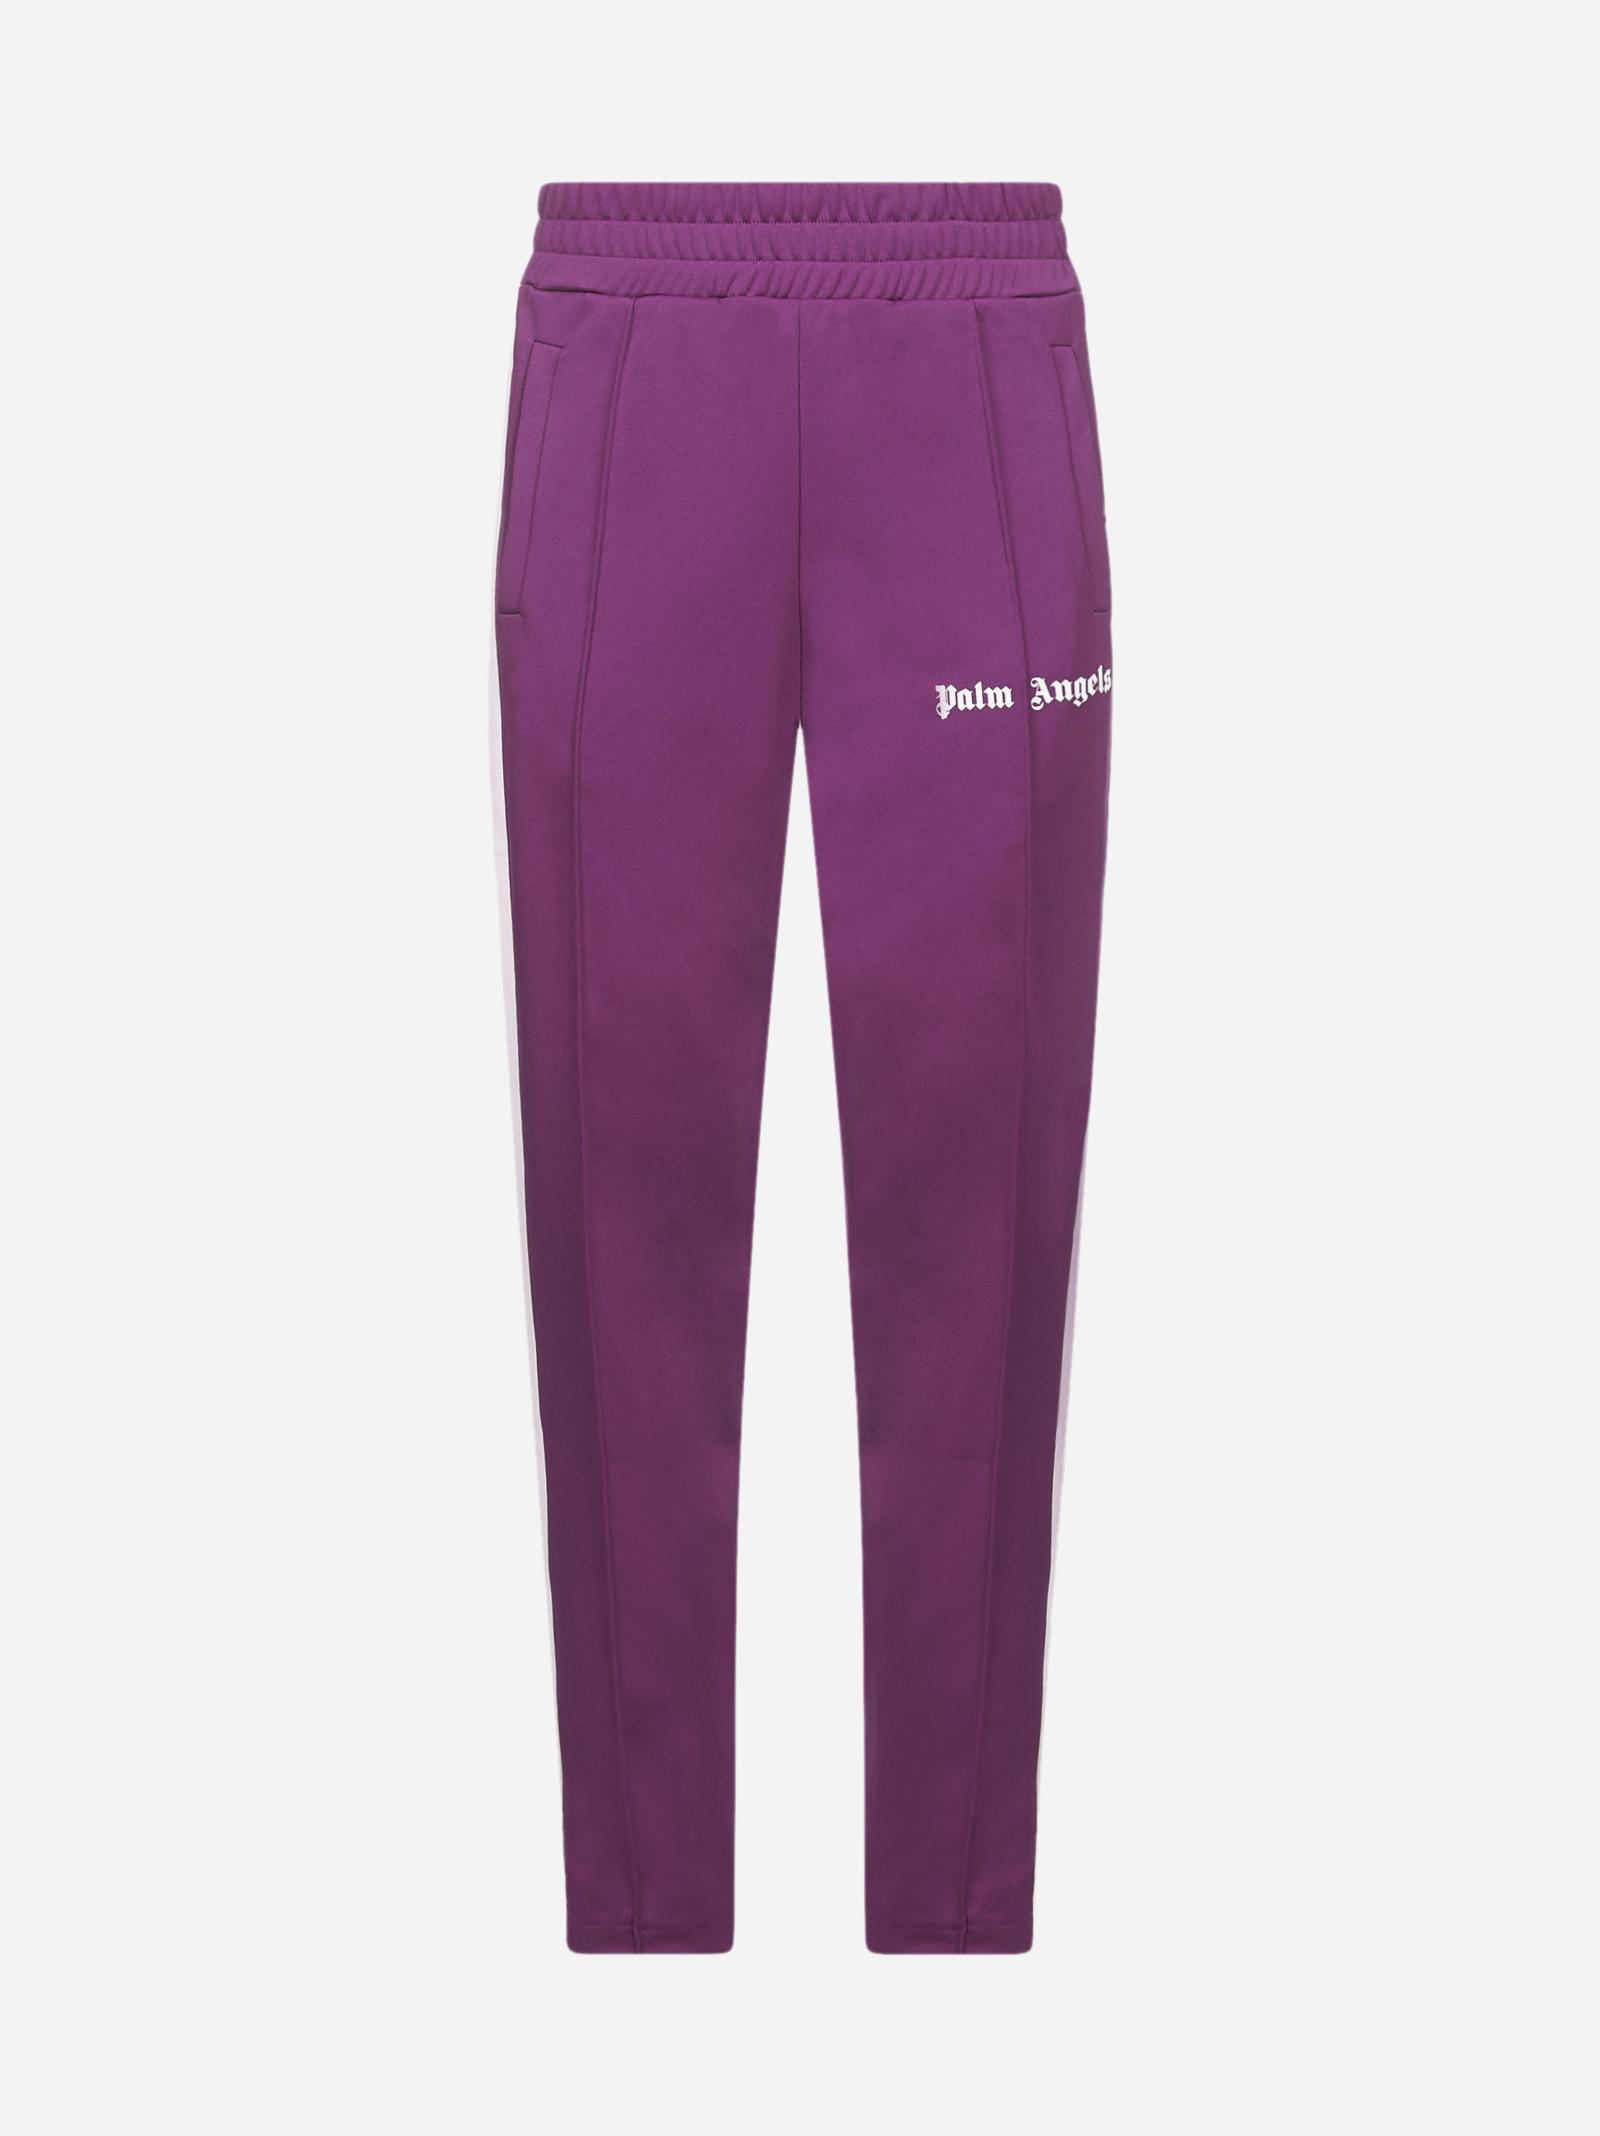 Palm Angels Logo Tracksuit Pants in Purple for Men - Lyst